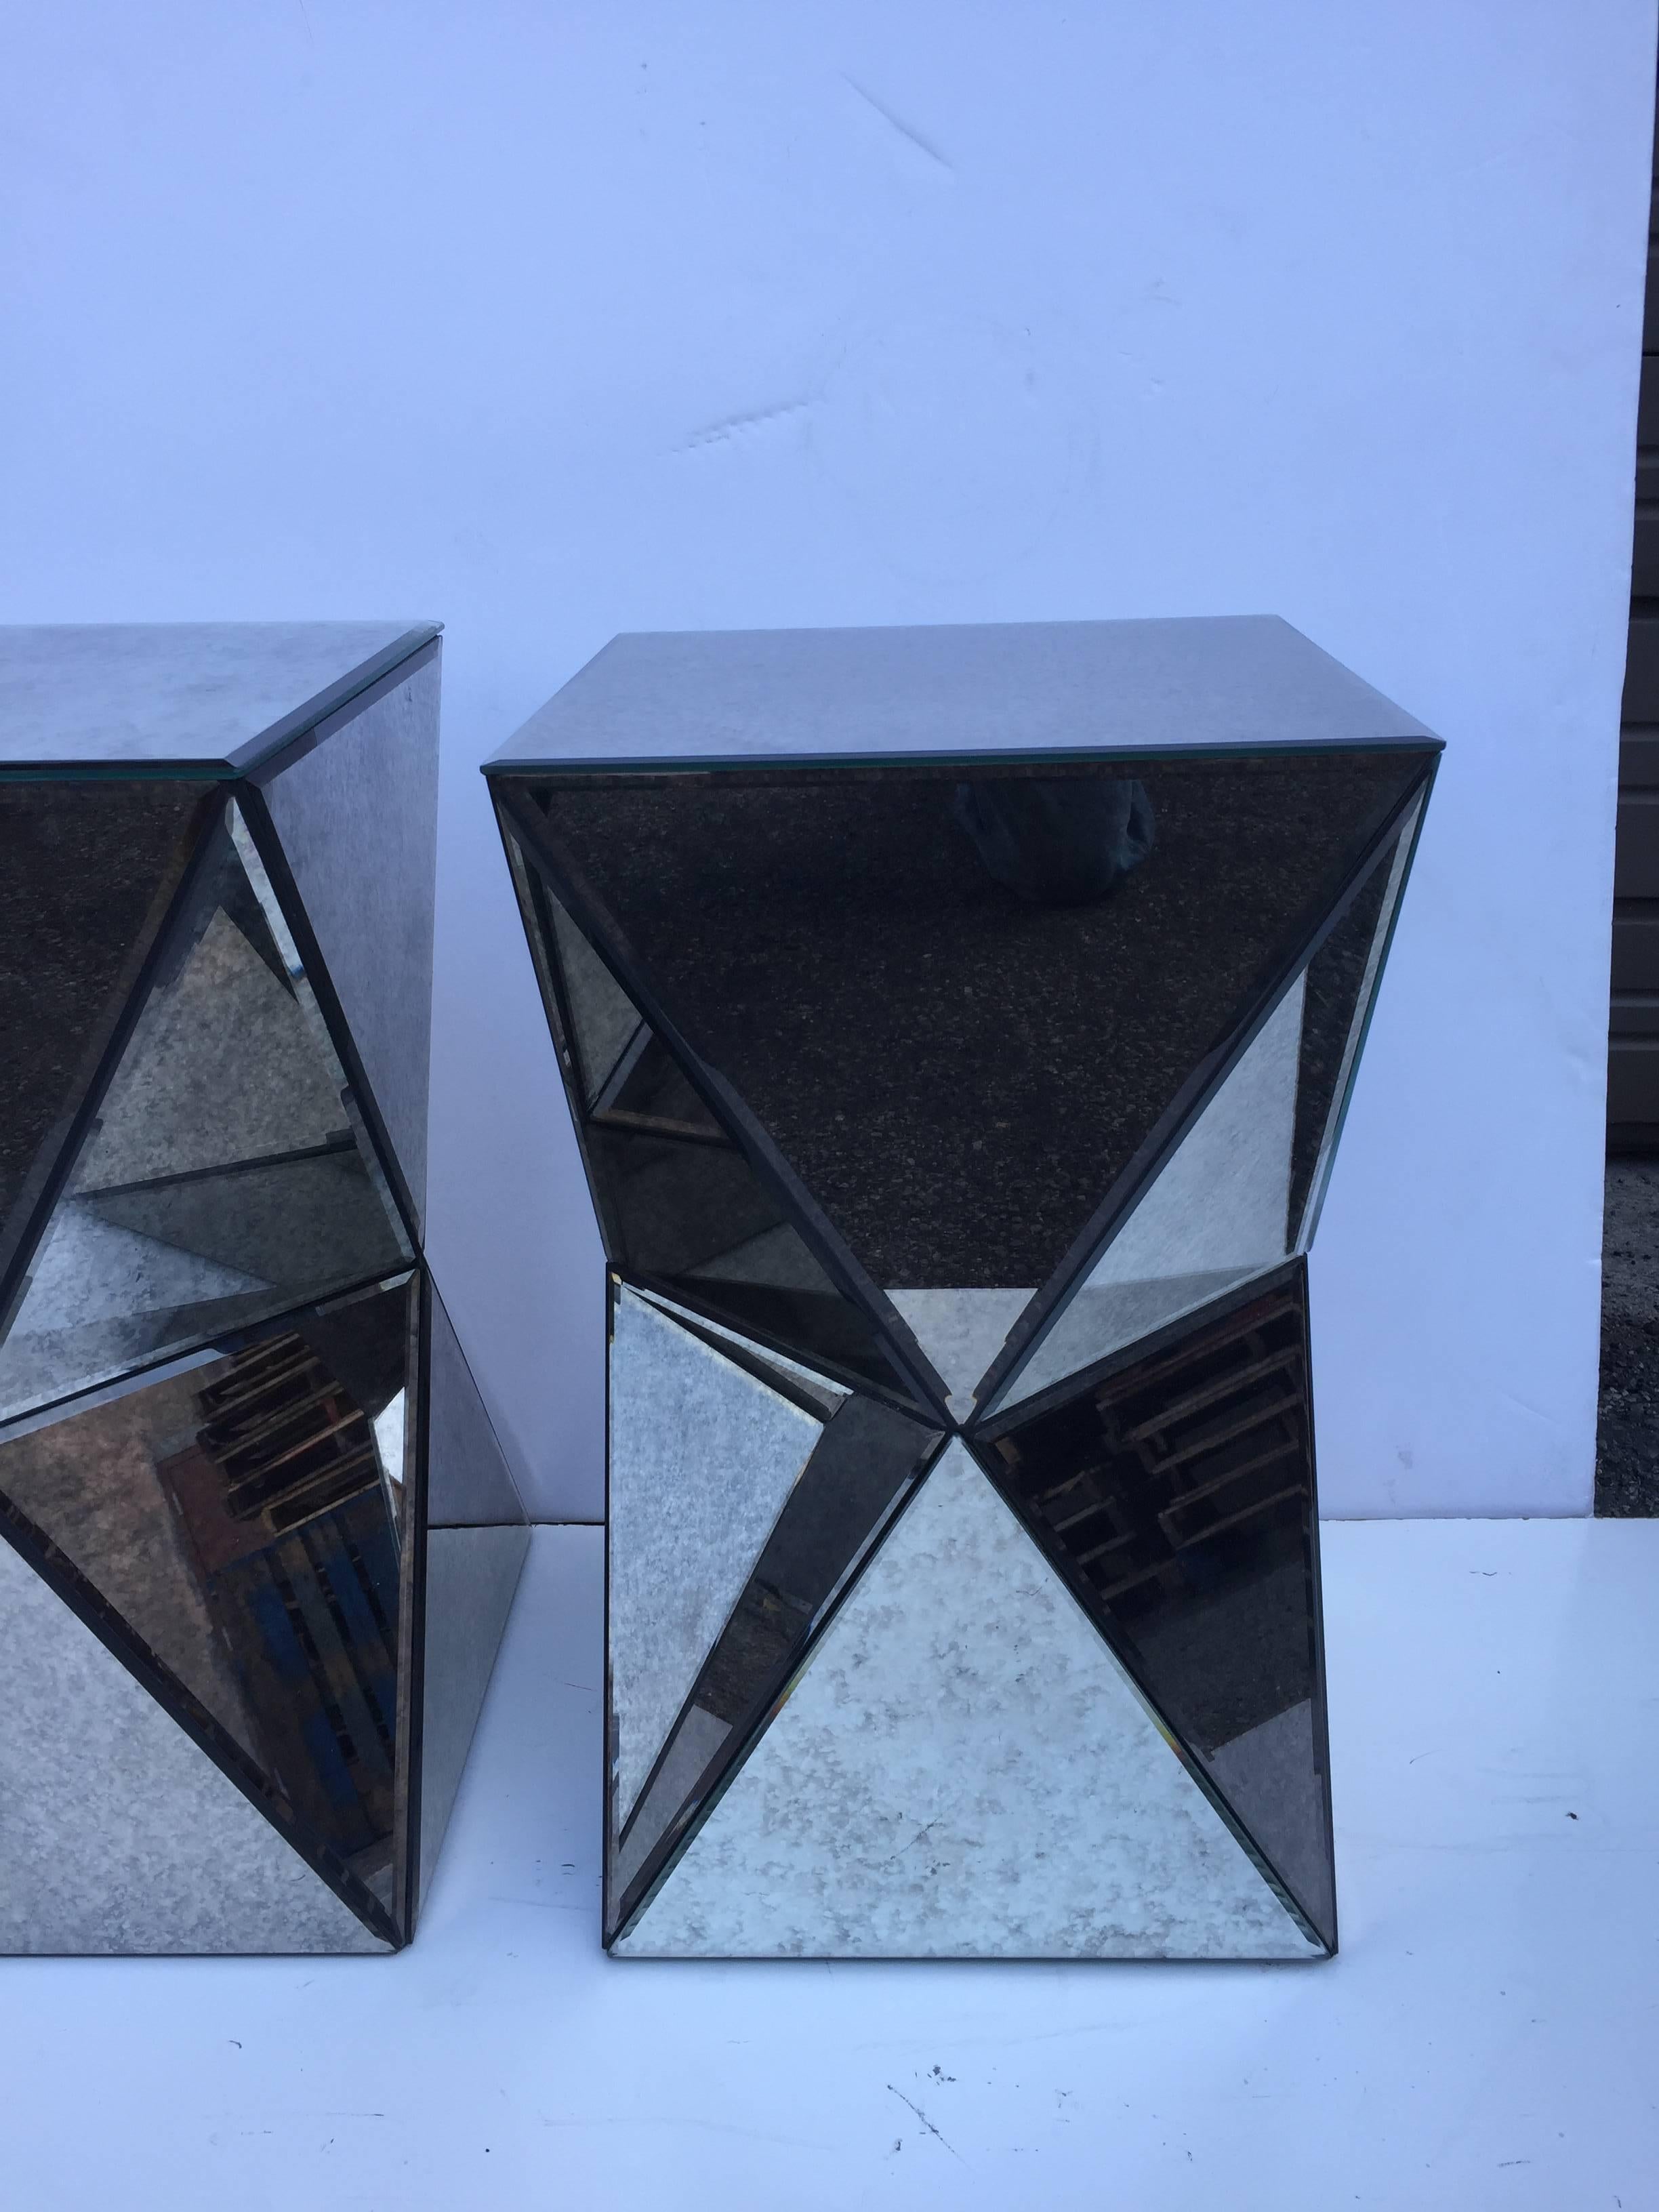 Pair of petite polyhedron small end and or side tables. Antique mirror clad with beveled edges.